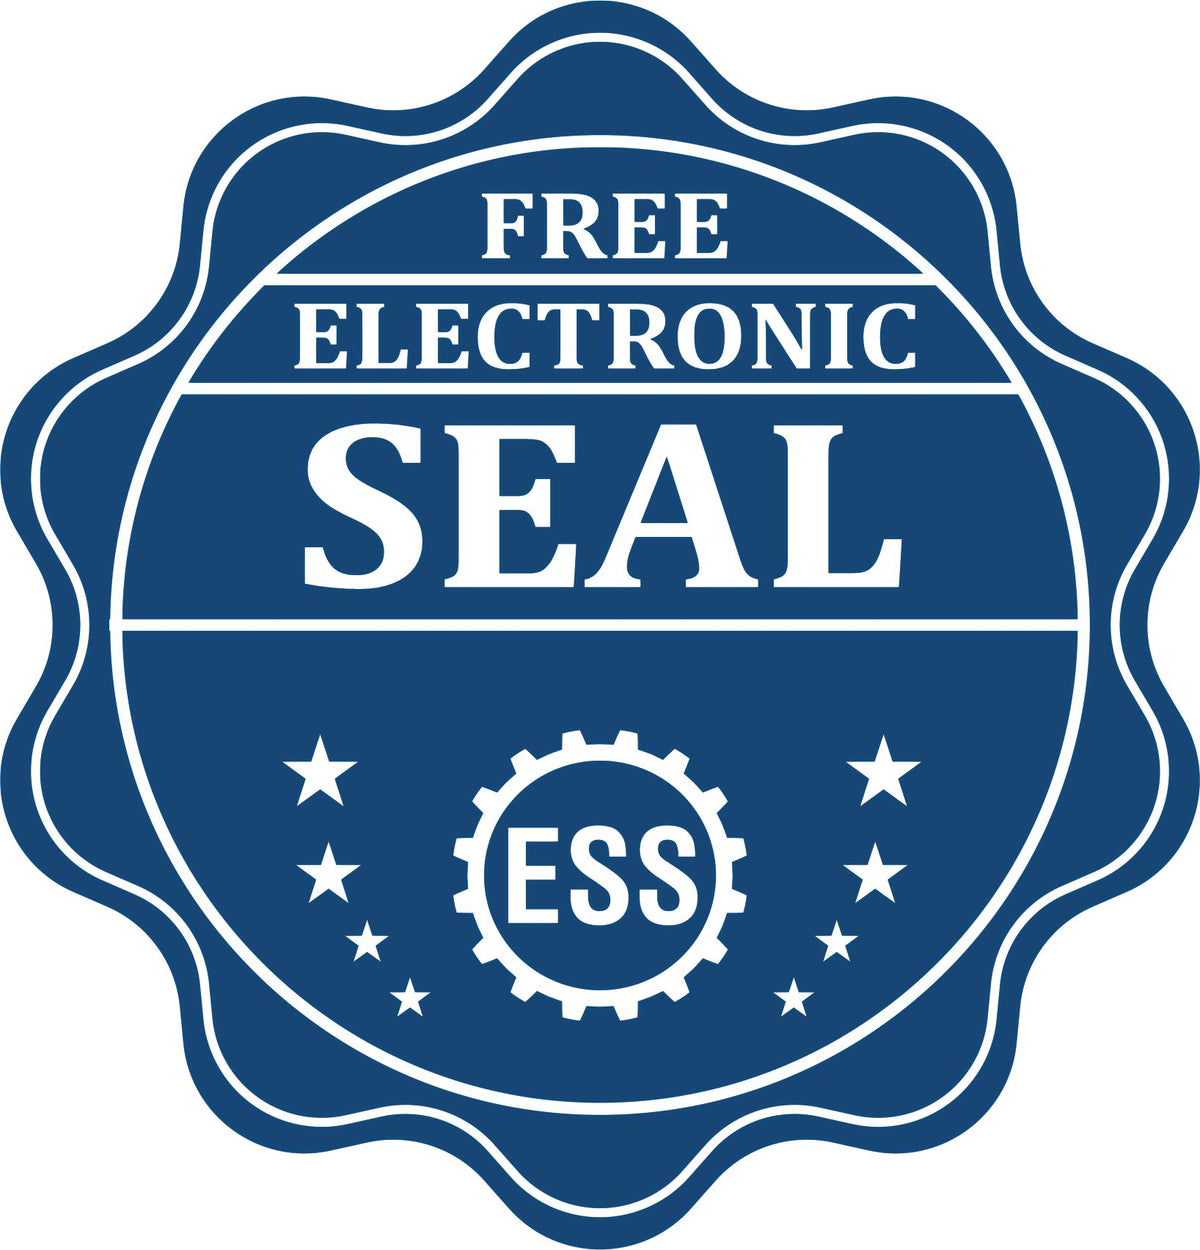 A badge showing a free electronic seal for the State of Illinois Long Reach Architectural Embossing Seal with stars and the ESS gear on the emblem.